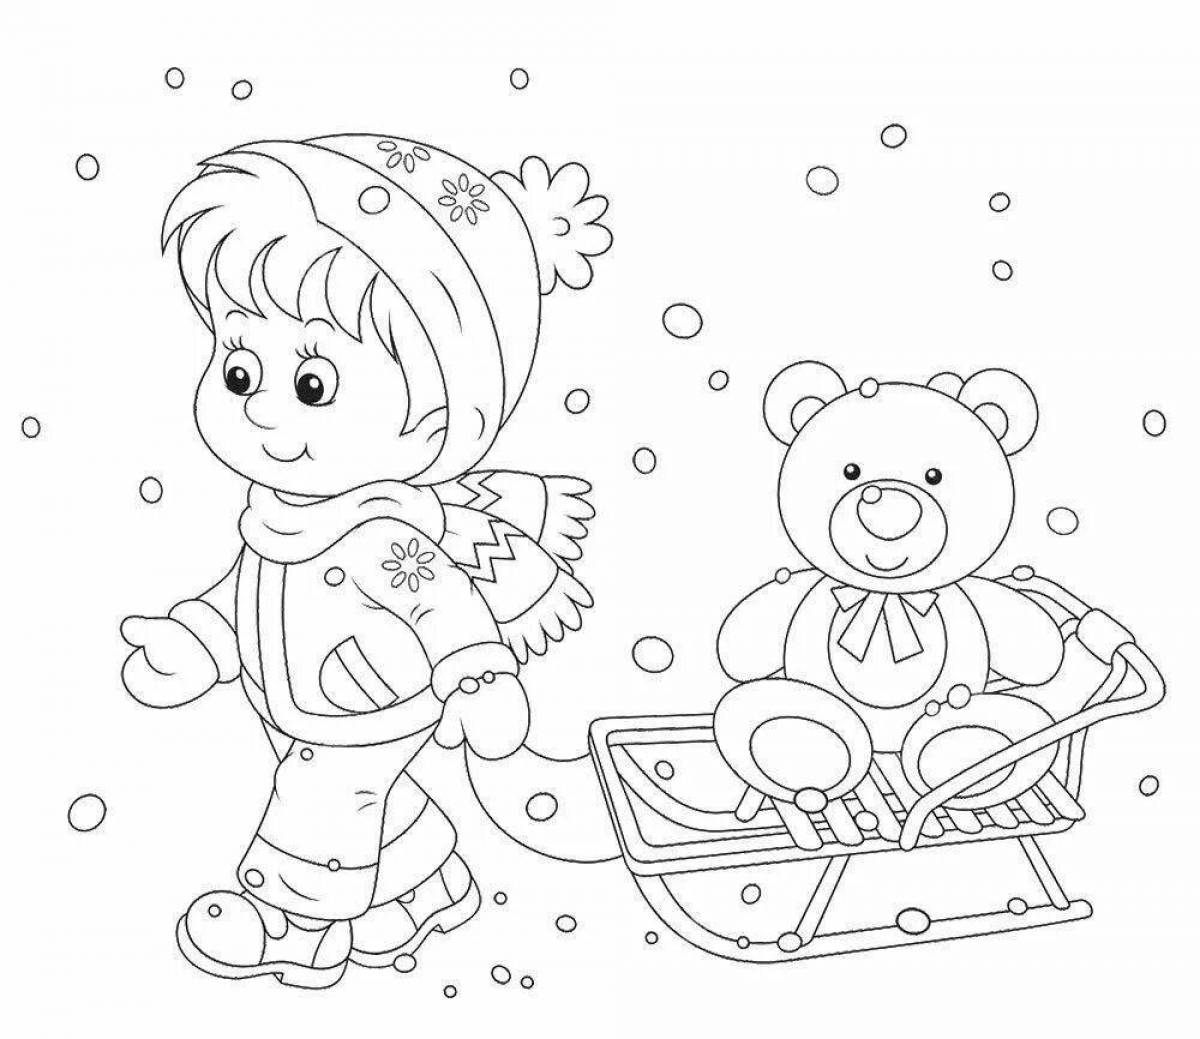 Coloring book shining sleds